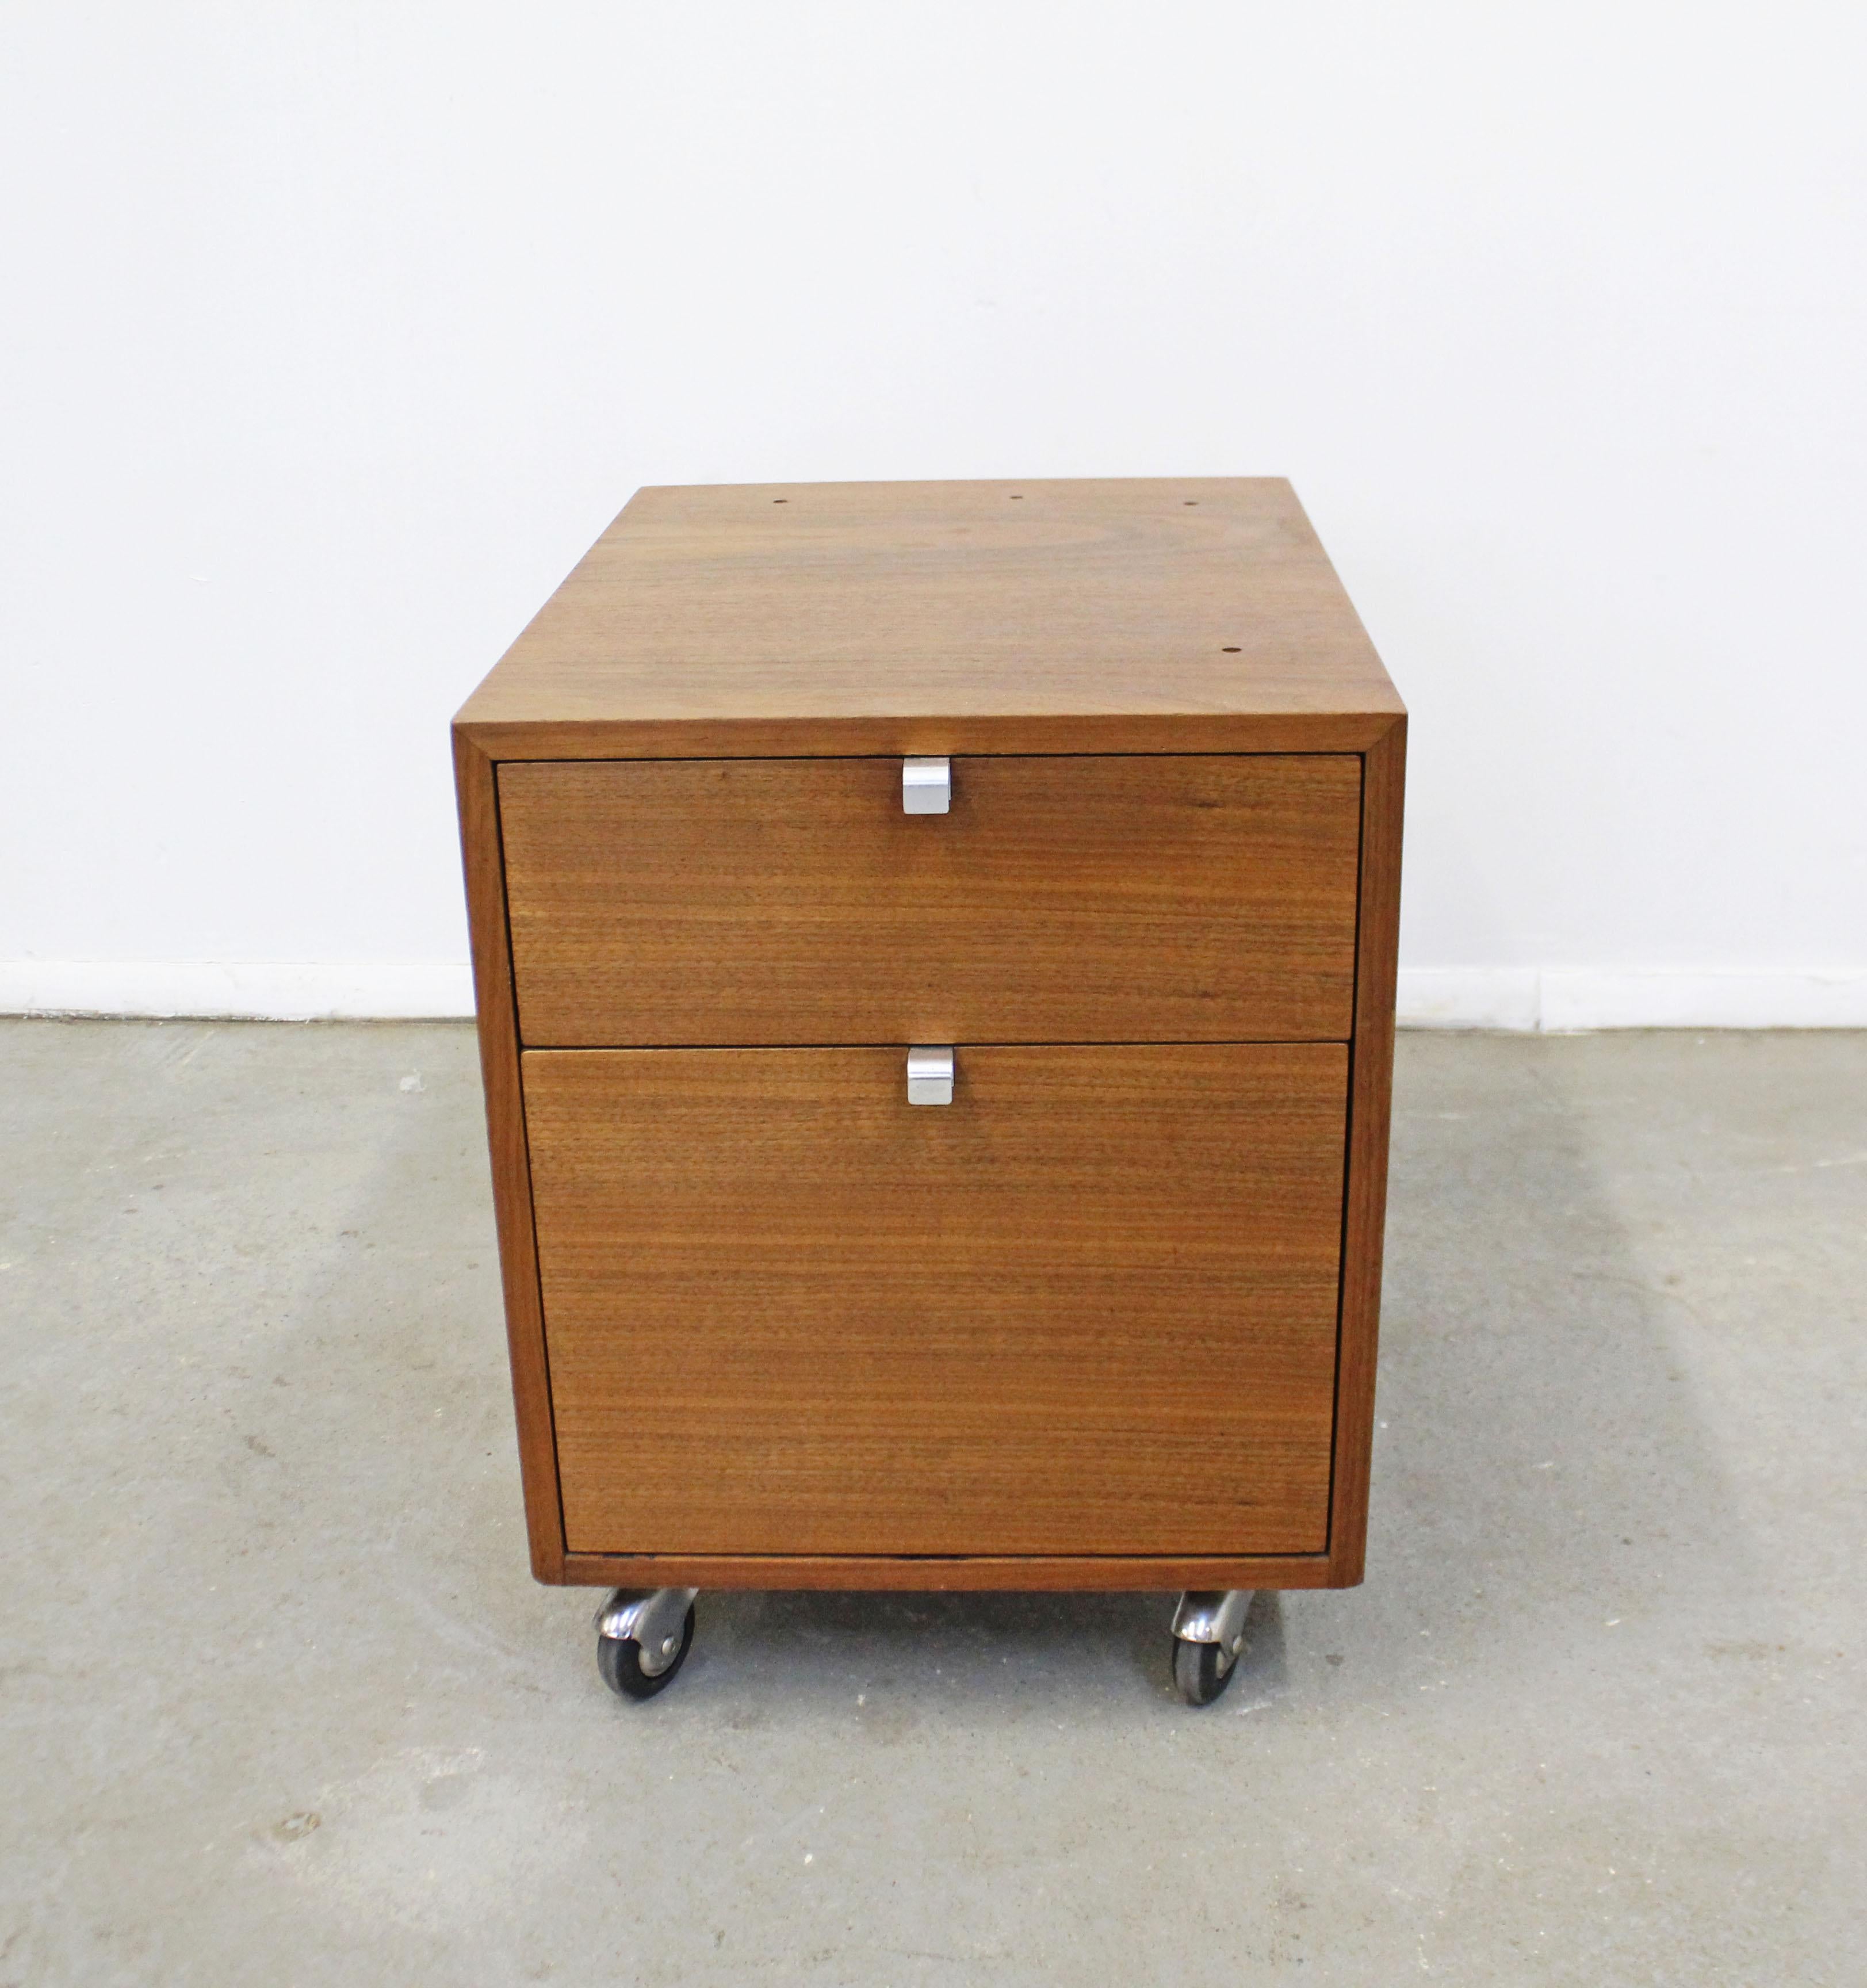 What a find. Offered is a vintage Mid-Century Modern file cabinet made by George Nelson for Herman Miller's iconic Comprehensive Storage Systems line. This piece is made of wood with two drawers, a side lock, and is on wheels. Has a lock for which